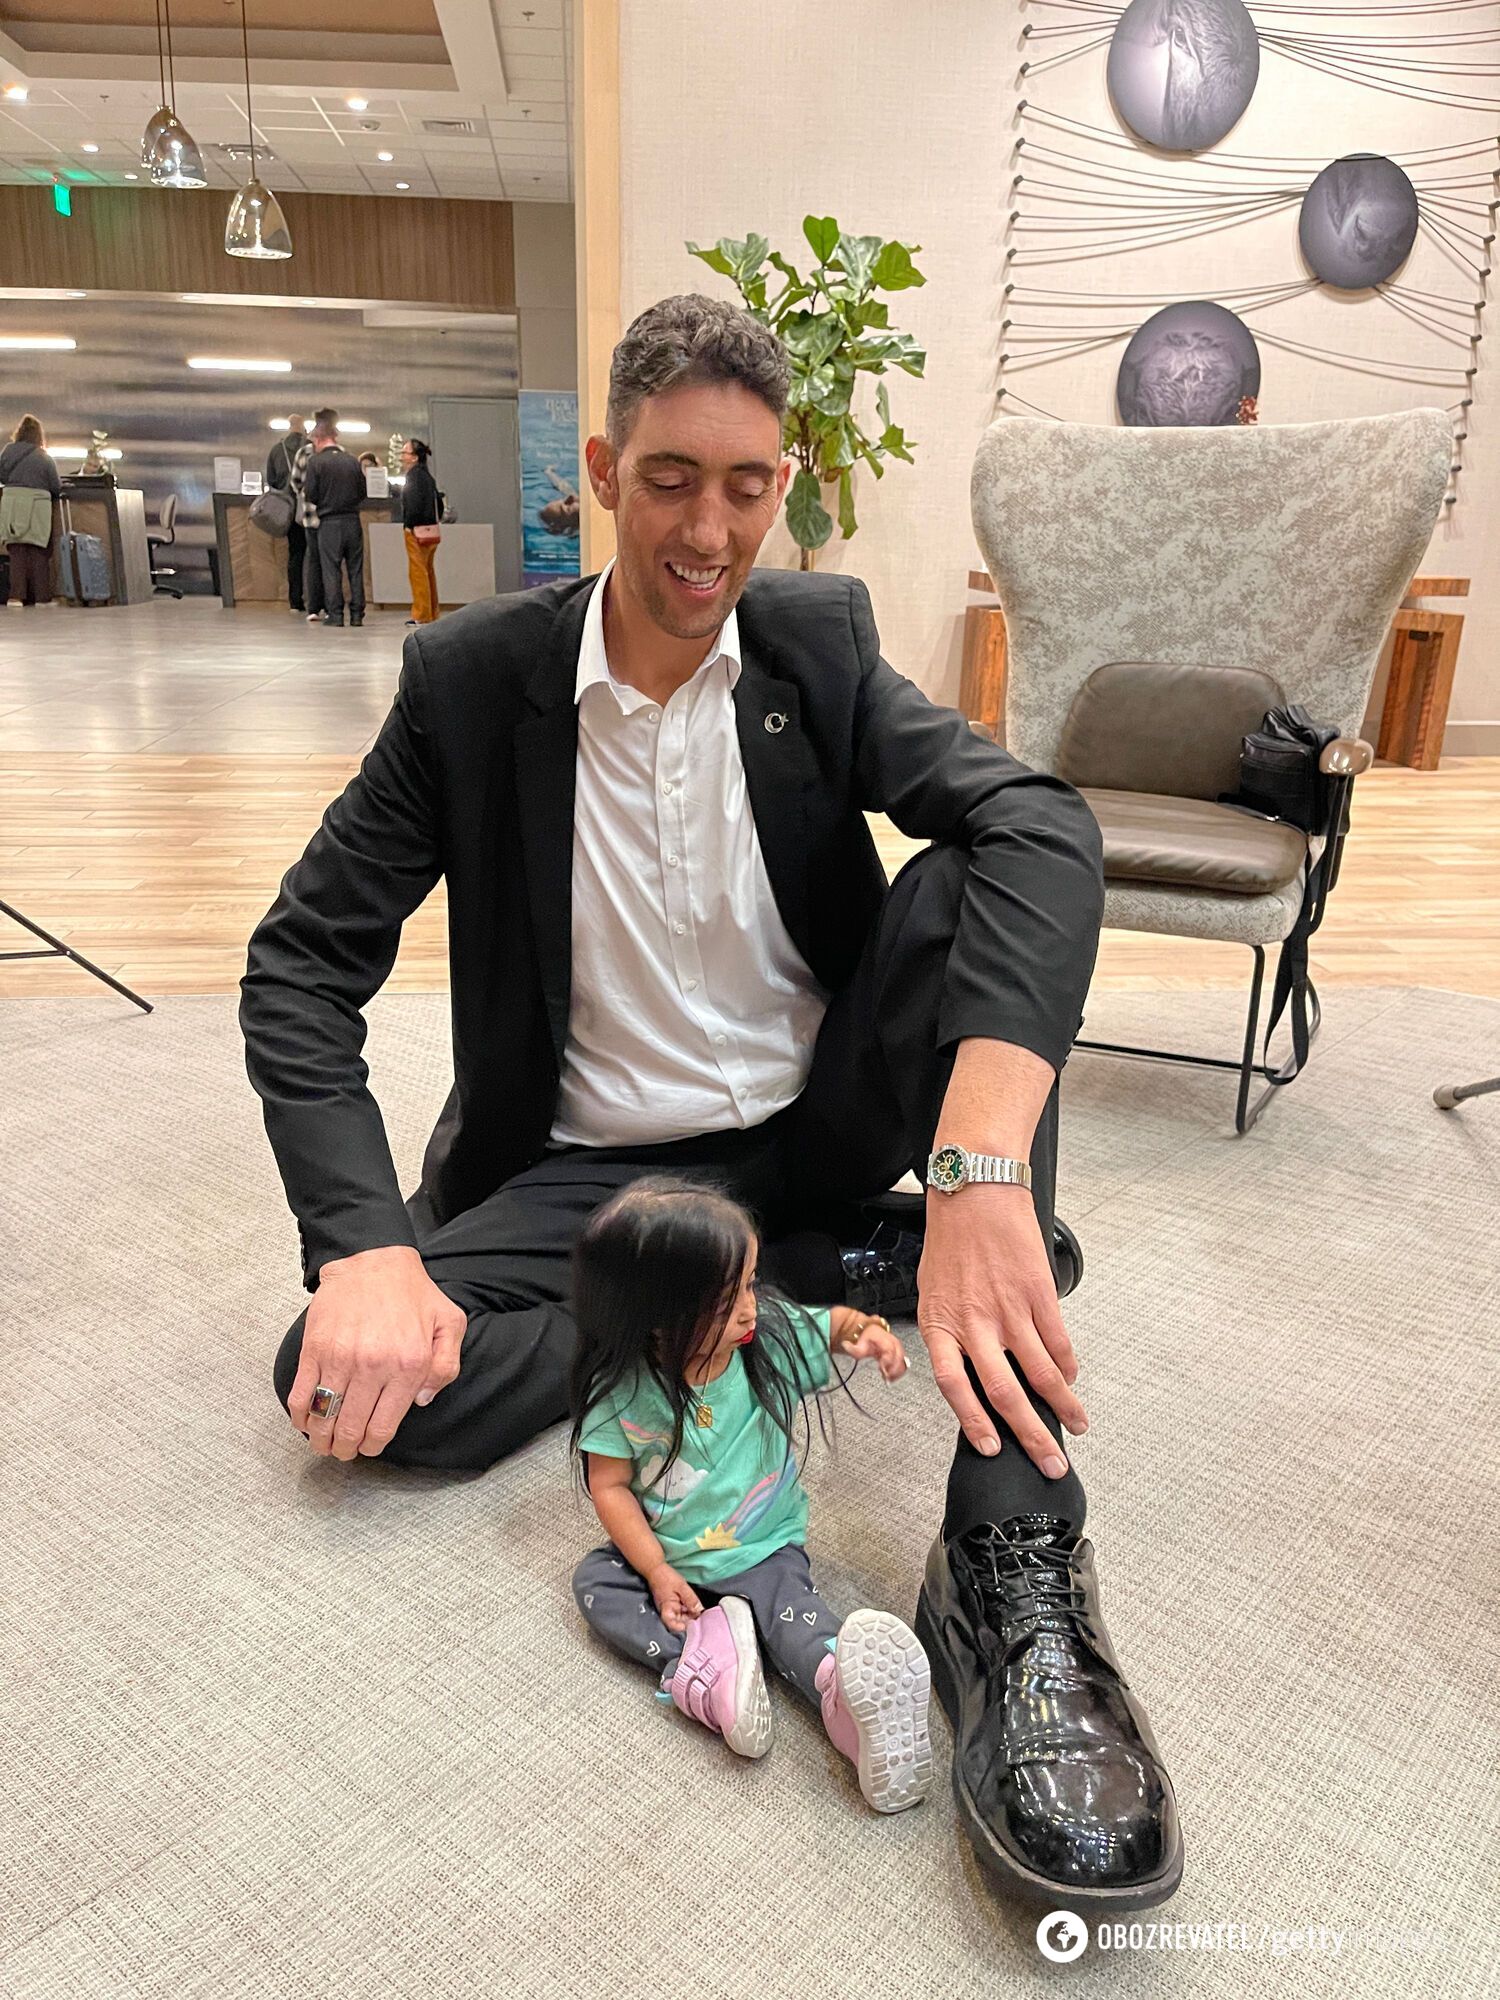 The smallest woman and the tallest man in the world meet again: 10 photos that will not leave you indifferent